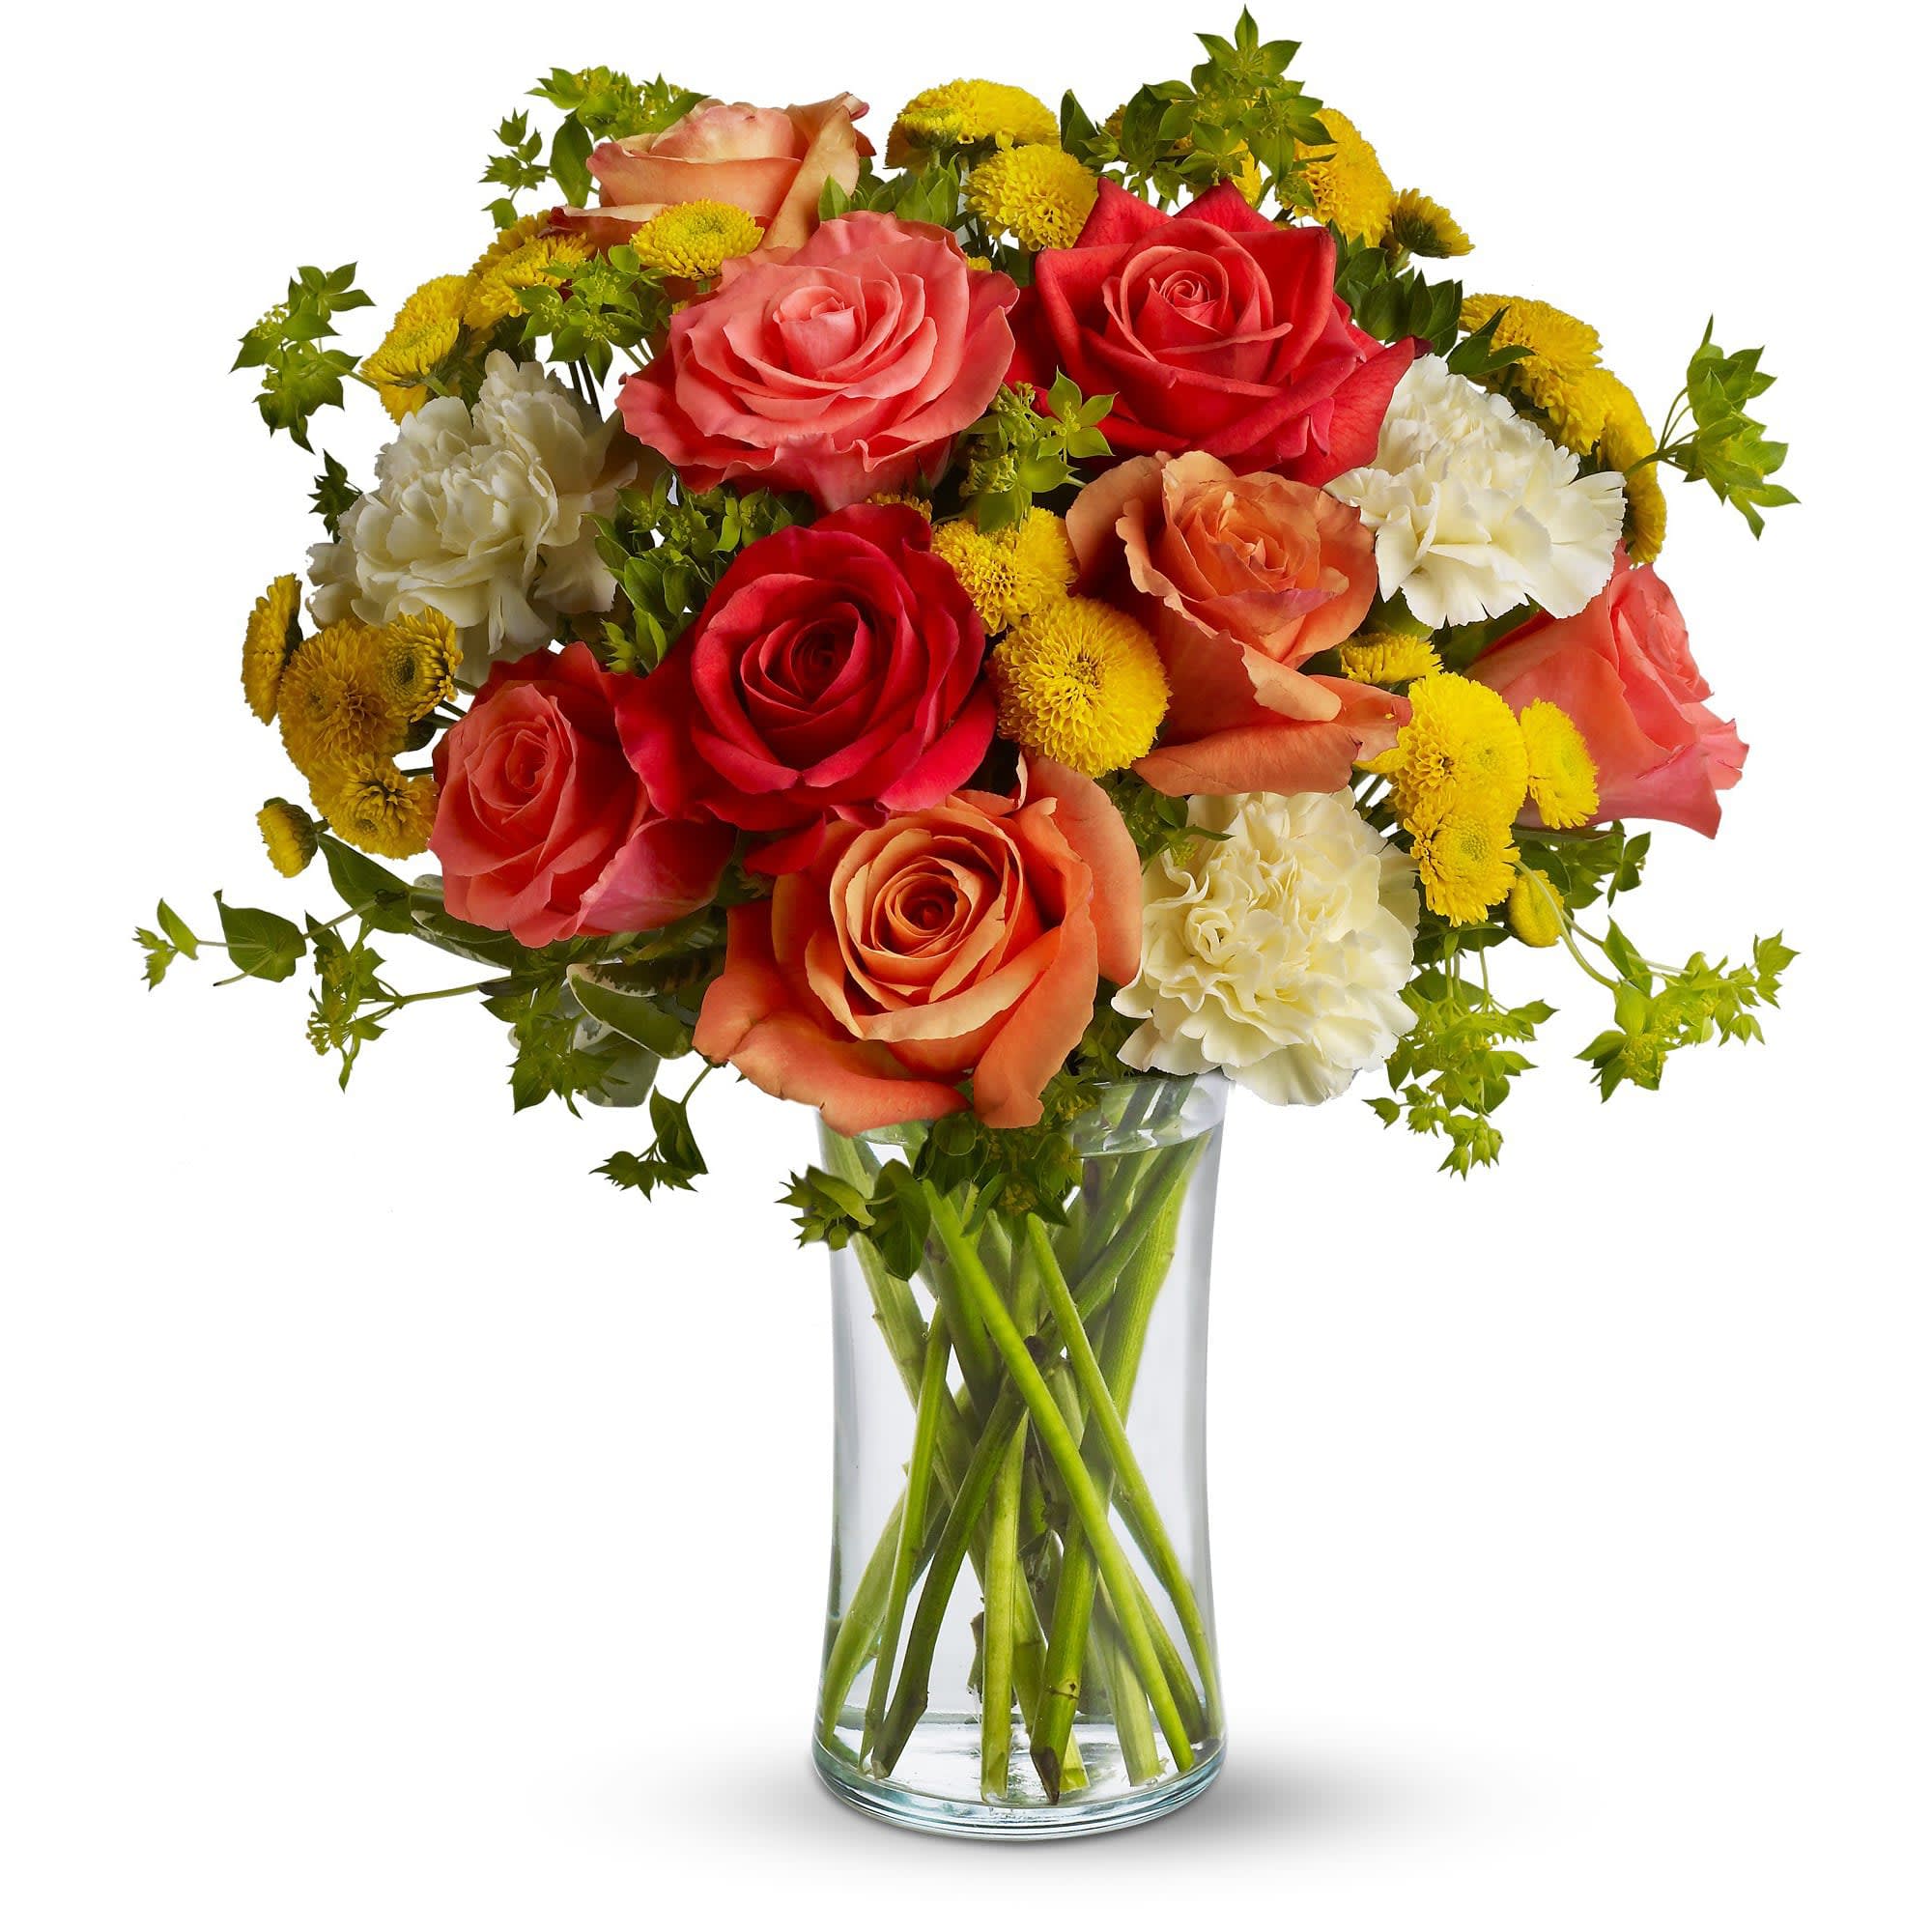 Citrus Kissed  - Like freshly squeezed lemonade on a hot sunny day, this bright and cheerful bouquet is a summer sensation. 